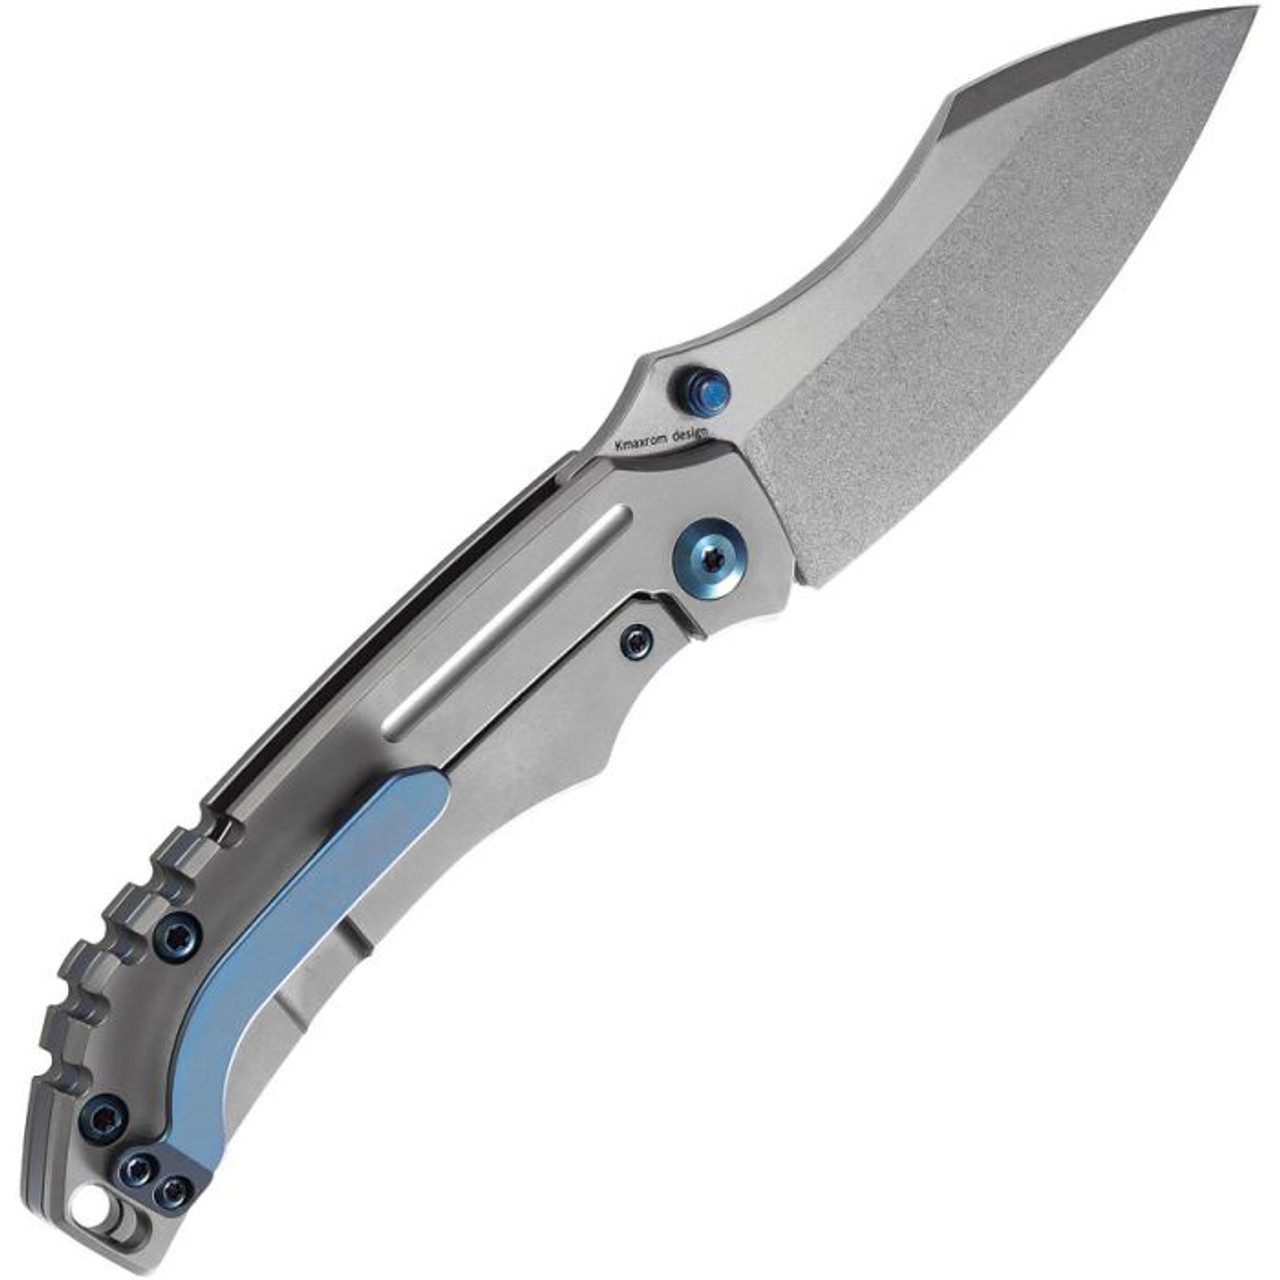 Kansept Knives Pelican (K1018A3) 3" CPM-S35VN Stonewashed Drop Point Plain Blade, Gray 6AL4V Titanium Handle with Blue Accents